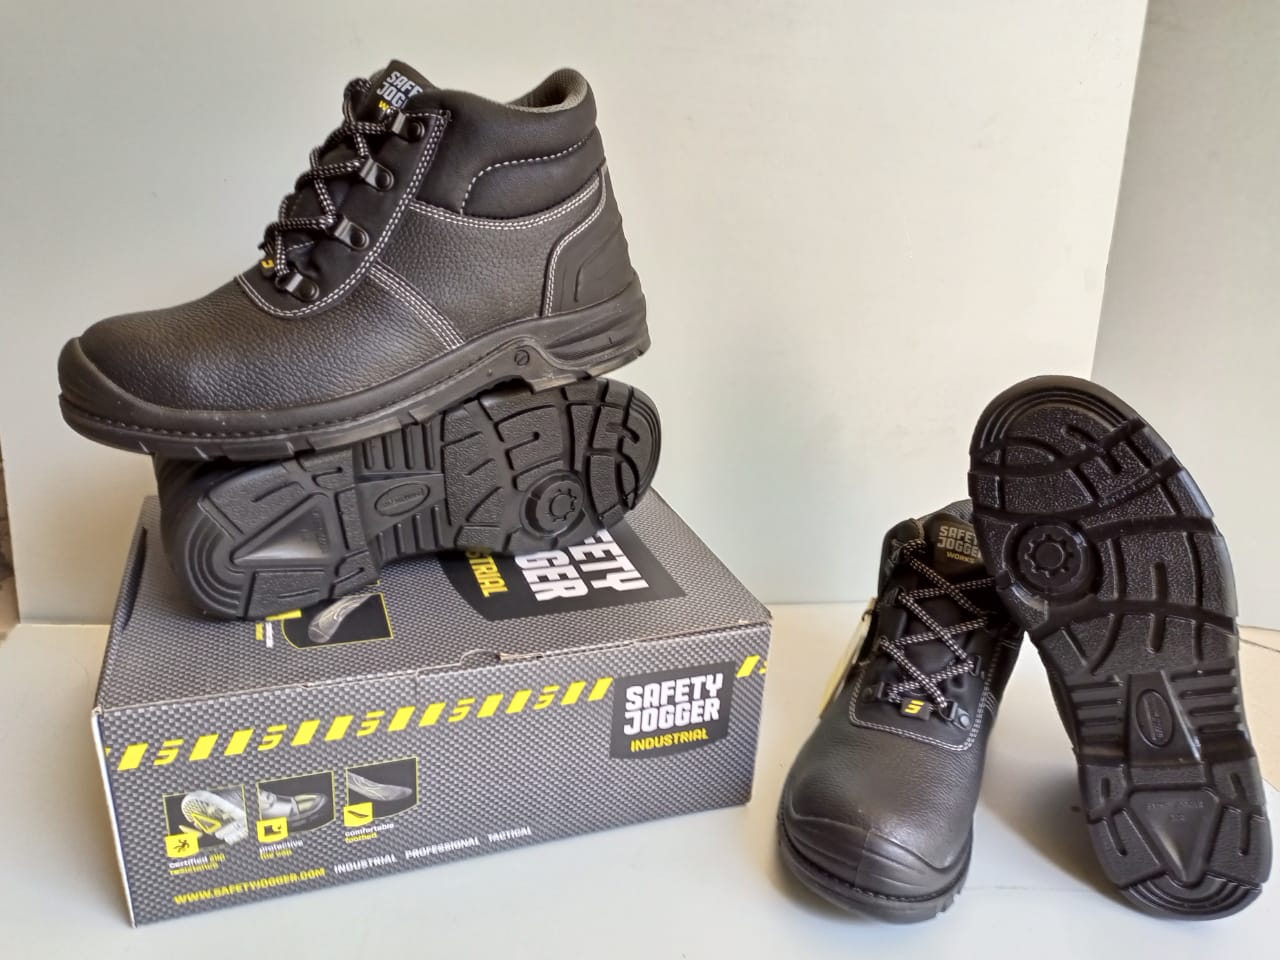 Safety Jogger Boots Price in Nairobi, Urban Tex